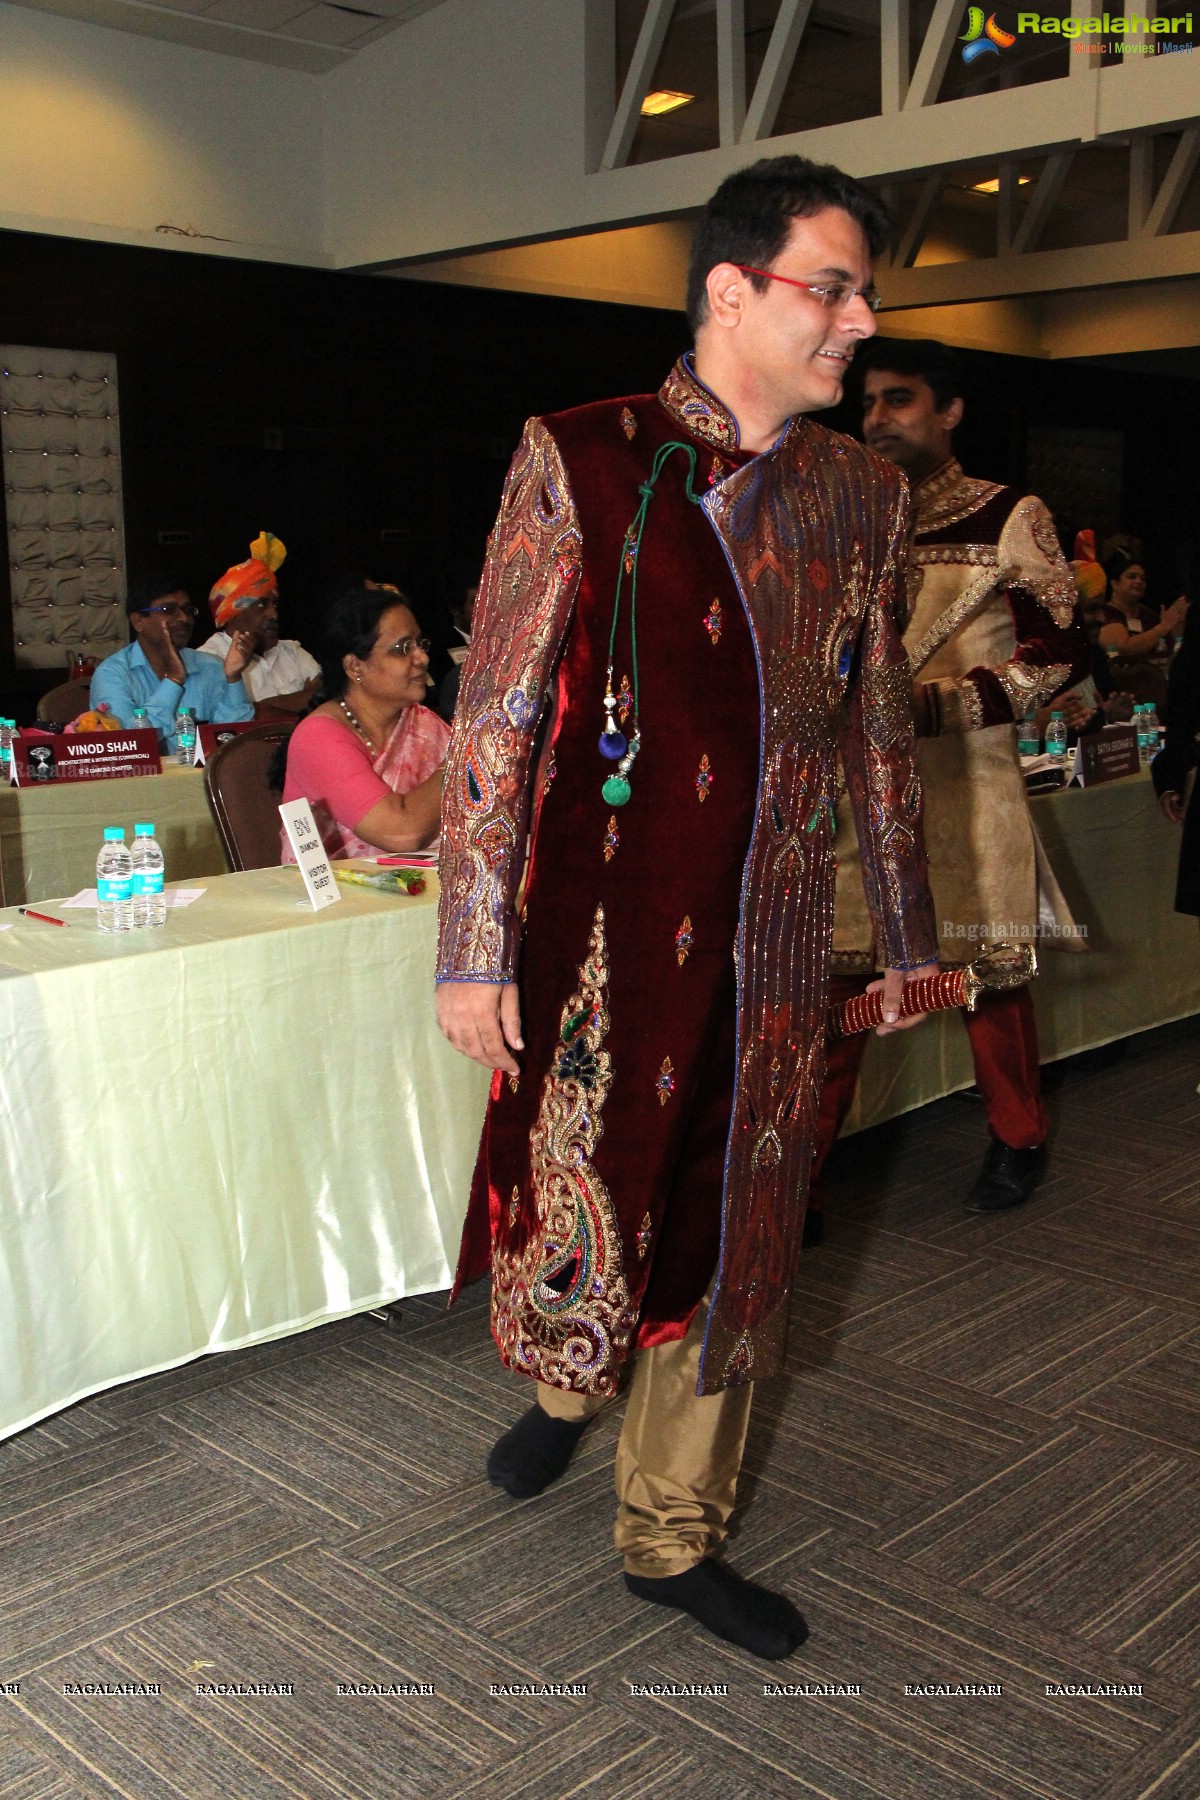 Excellence by Maharaja Fashion Show at JRC Conventions & Trade Fairs, Hyderabad